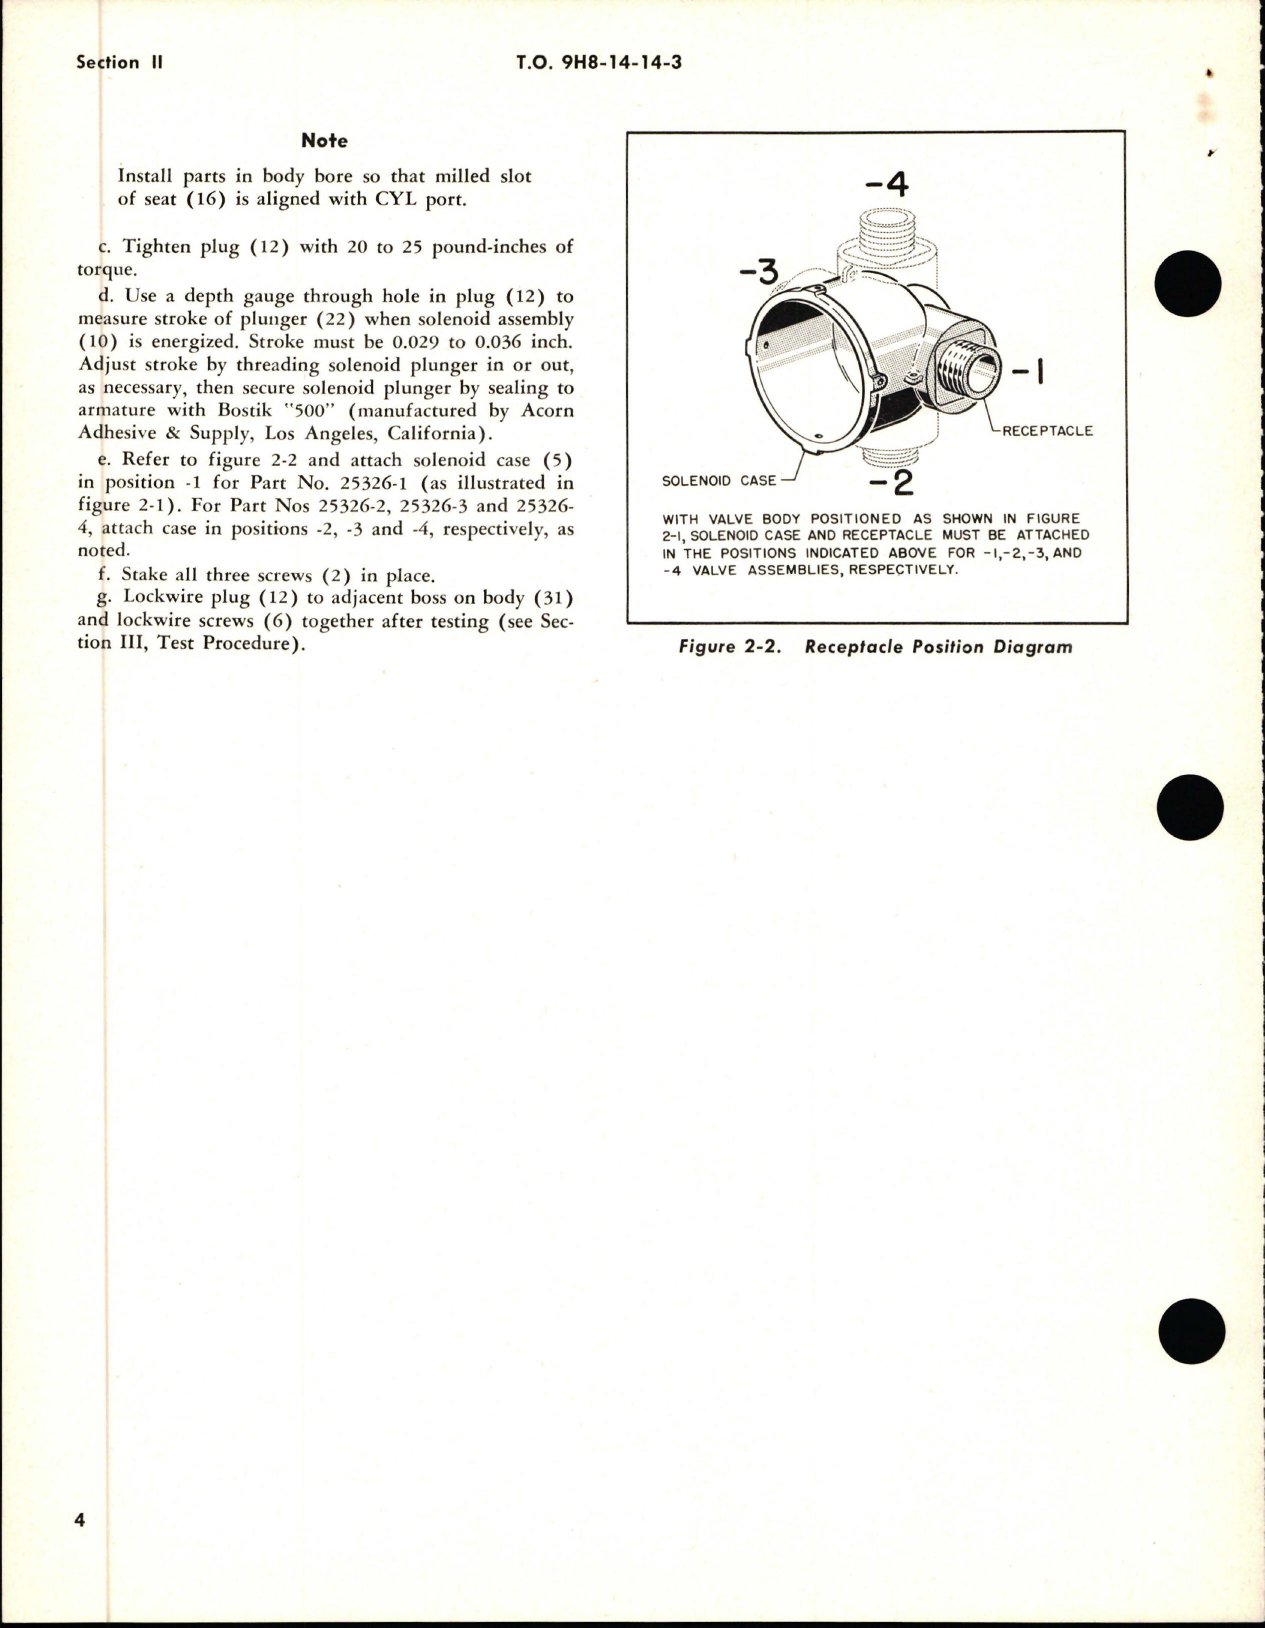 Sample page 8 from AirCorps Library document: Overhaul Instructions for Selector Valve Assemblies